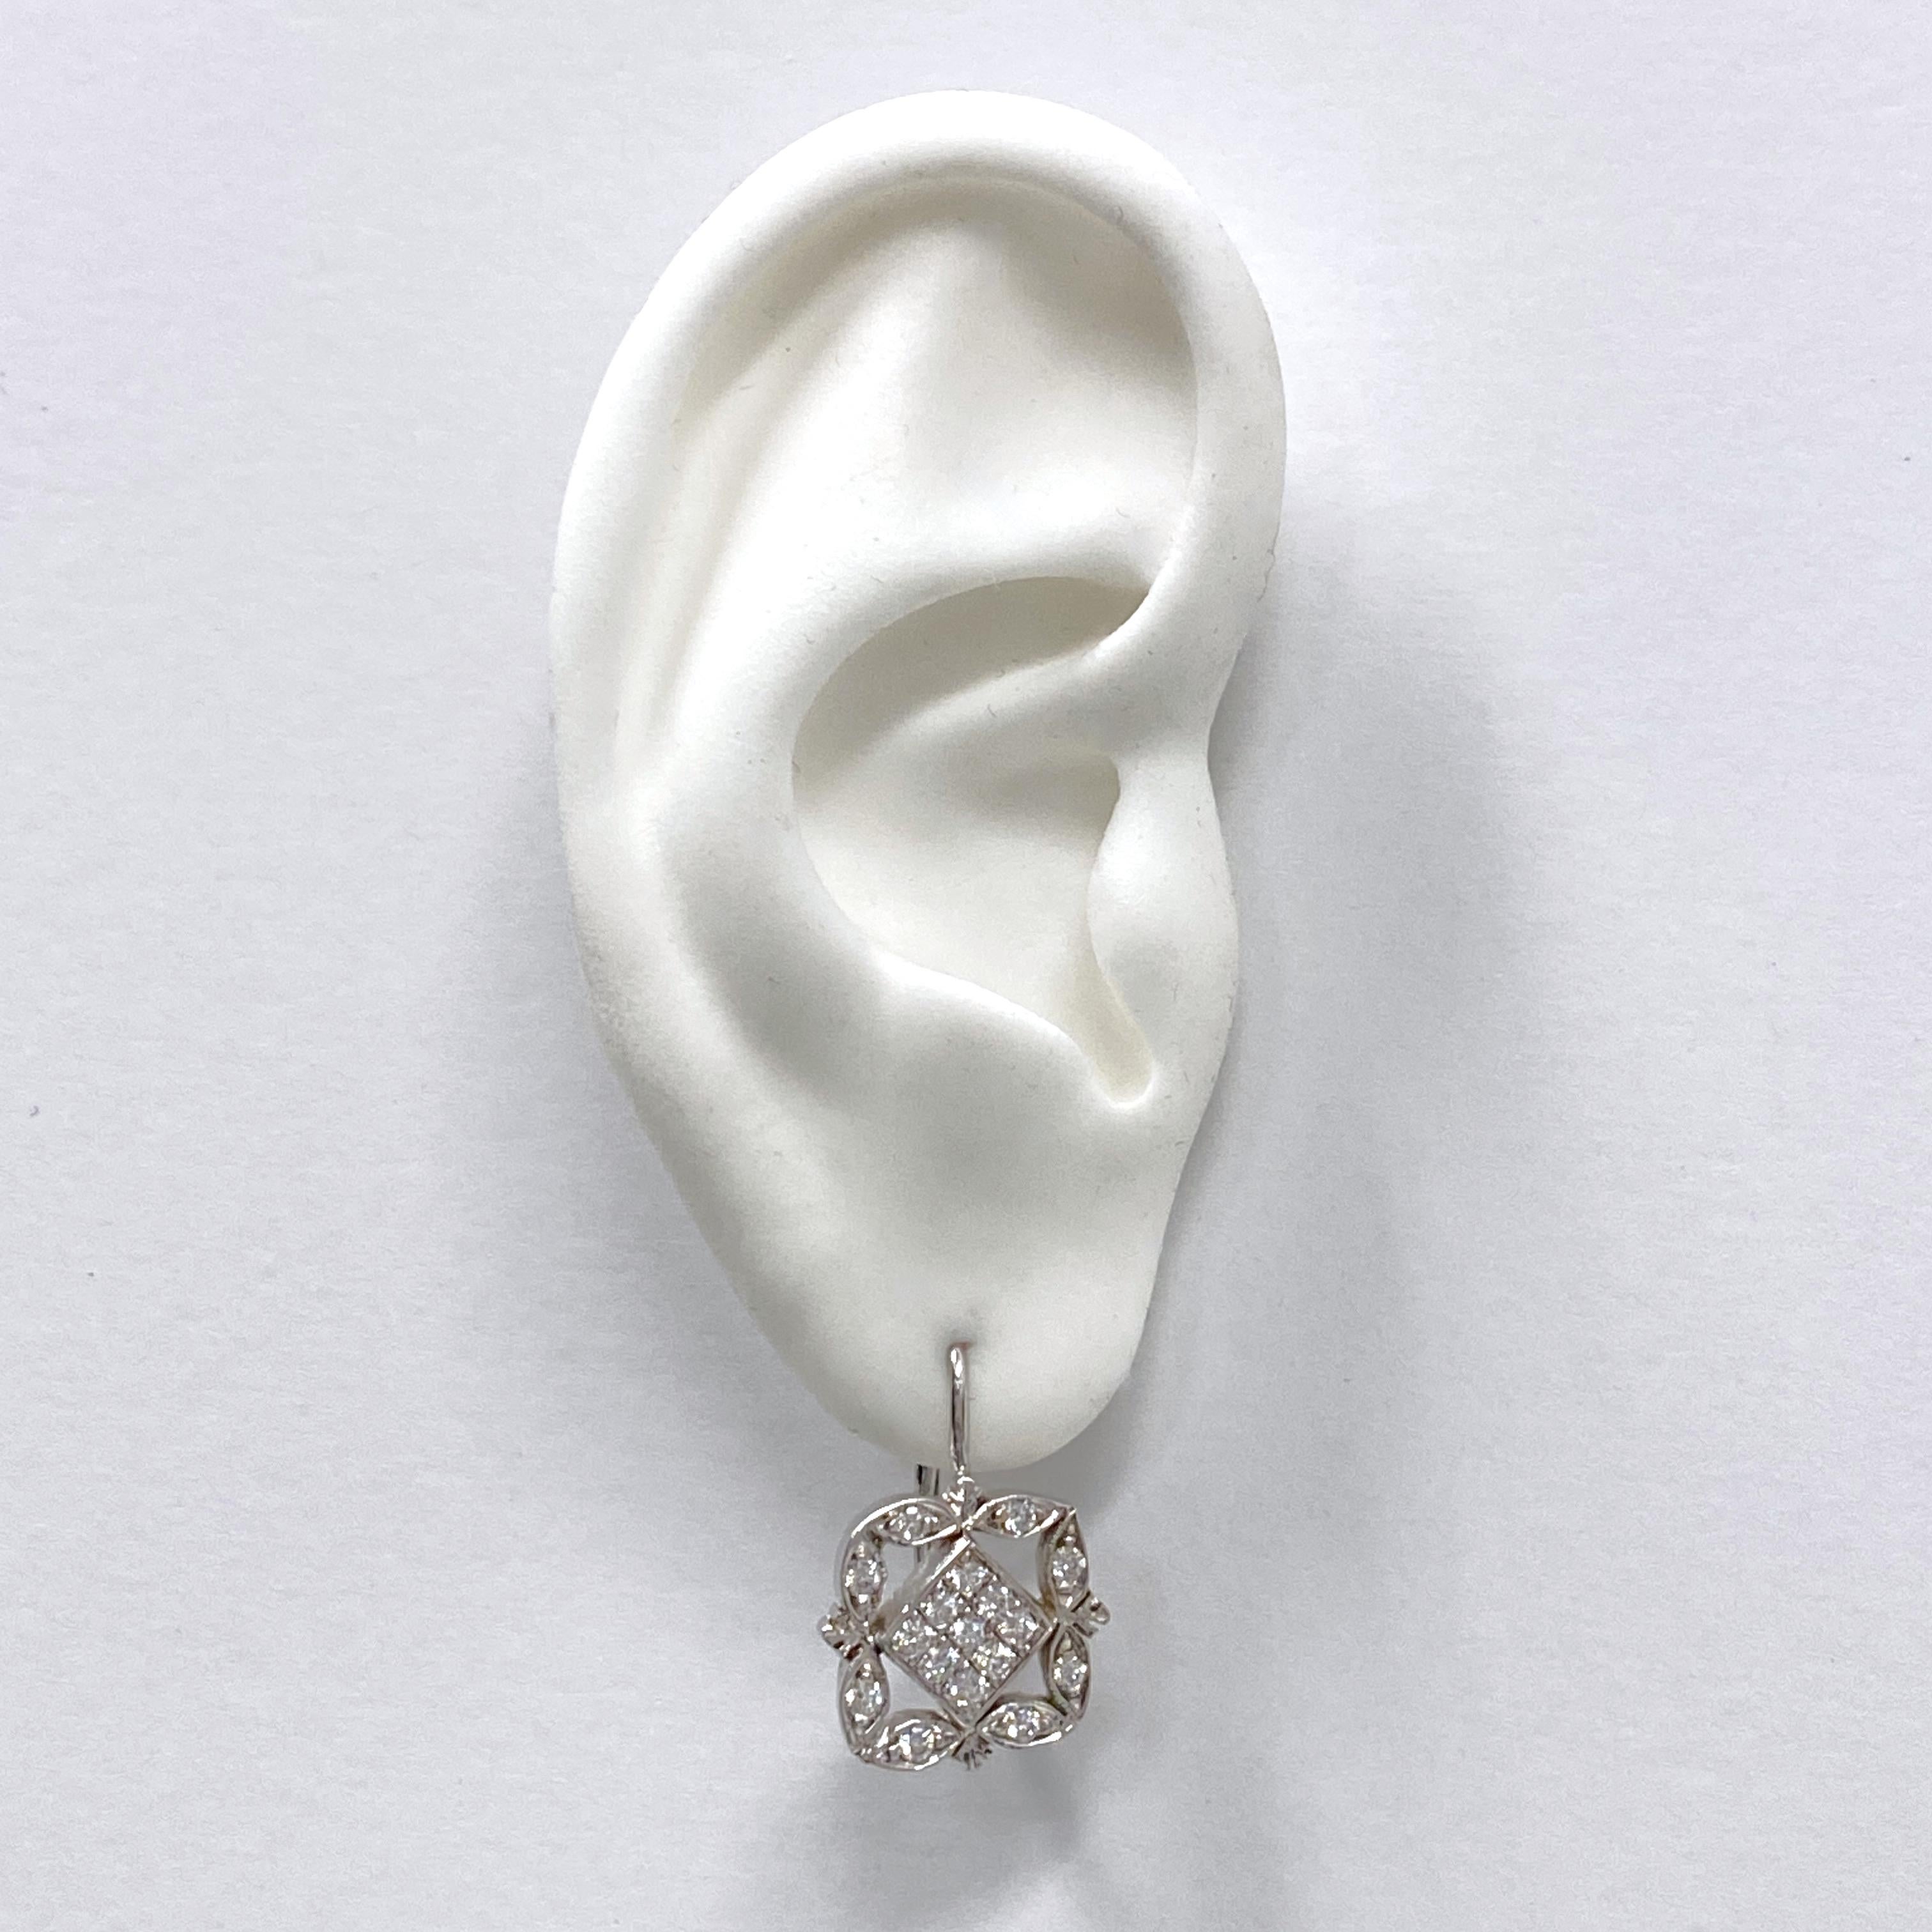 These snappy leverback earrings by Eytan Brandes have the look of Edwardian drops, but they're set with bright-white modern cut diamonds, so they're much sparklier than anything from that earlier period (when gemcutting technology couldn't yet